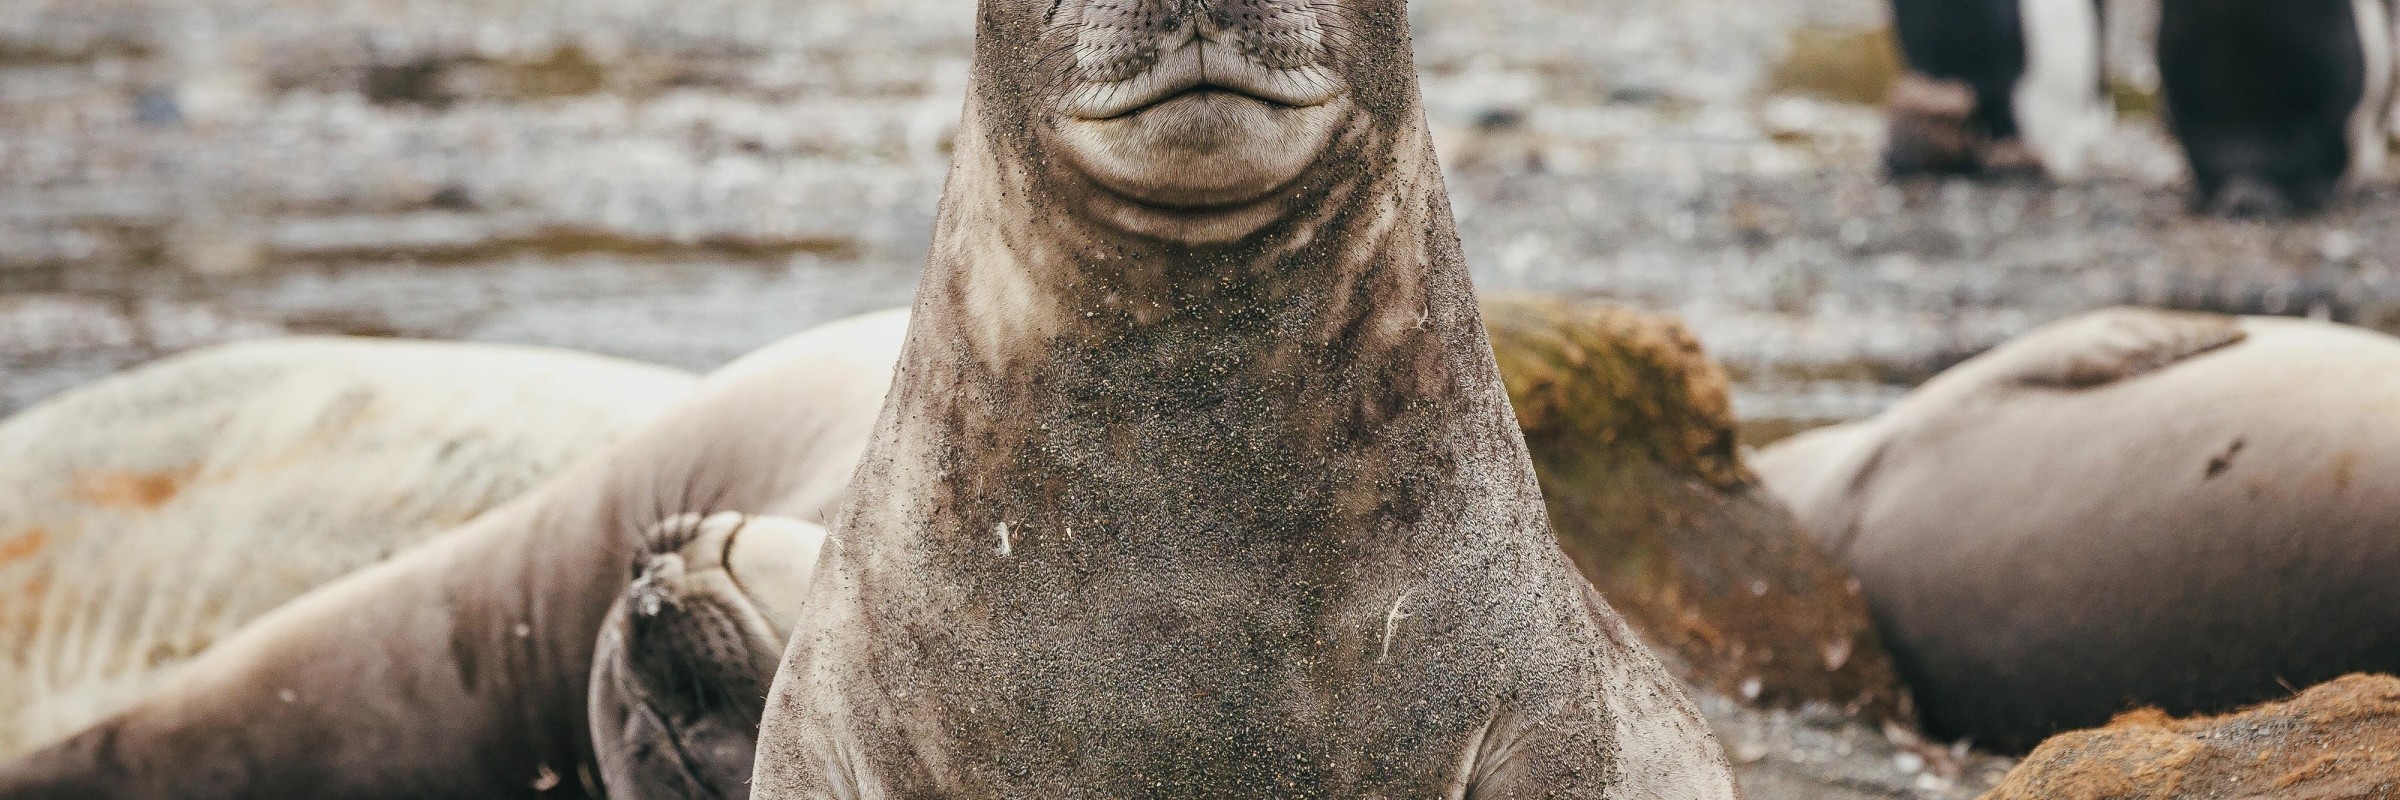 An elephant seal in South Georgia looks into the camera. Photo by David Merron.